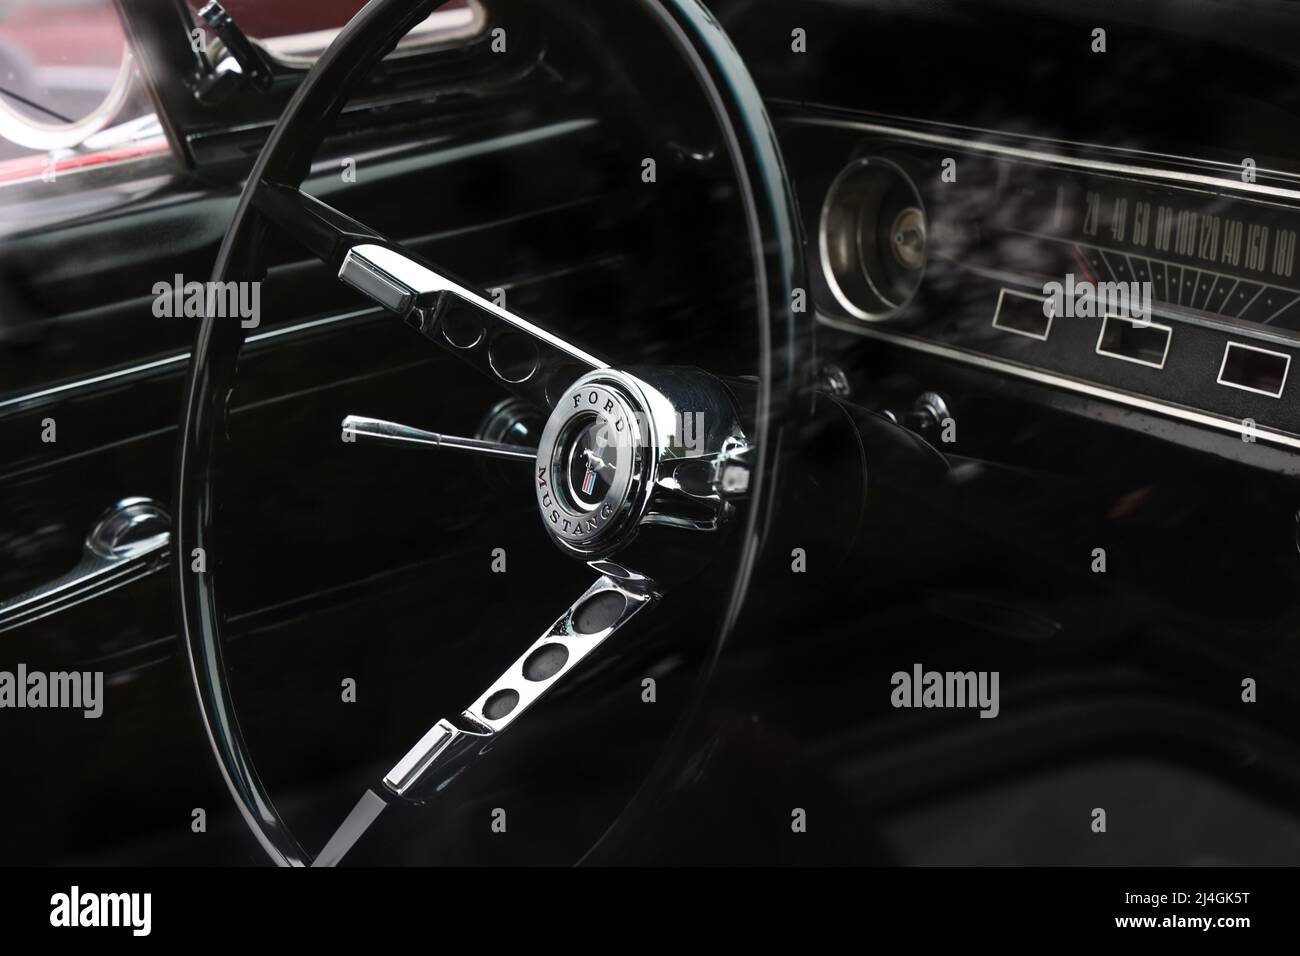 1965 Ford Mustang interior Stock Photo